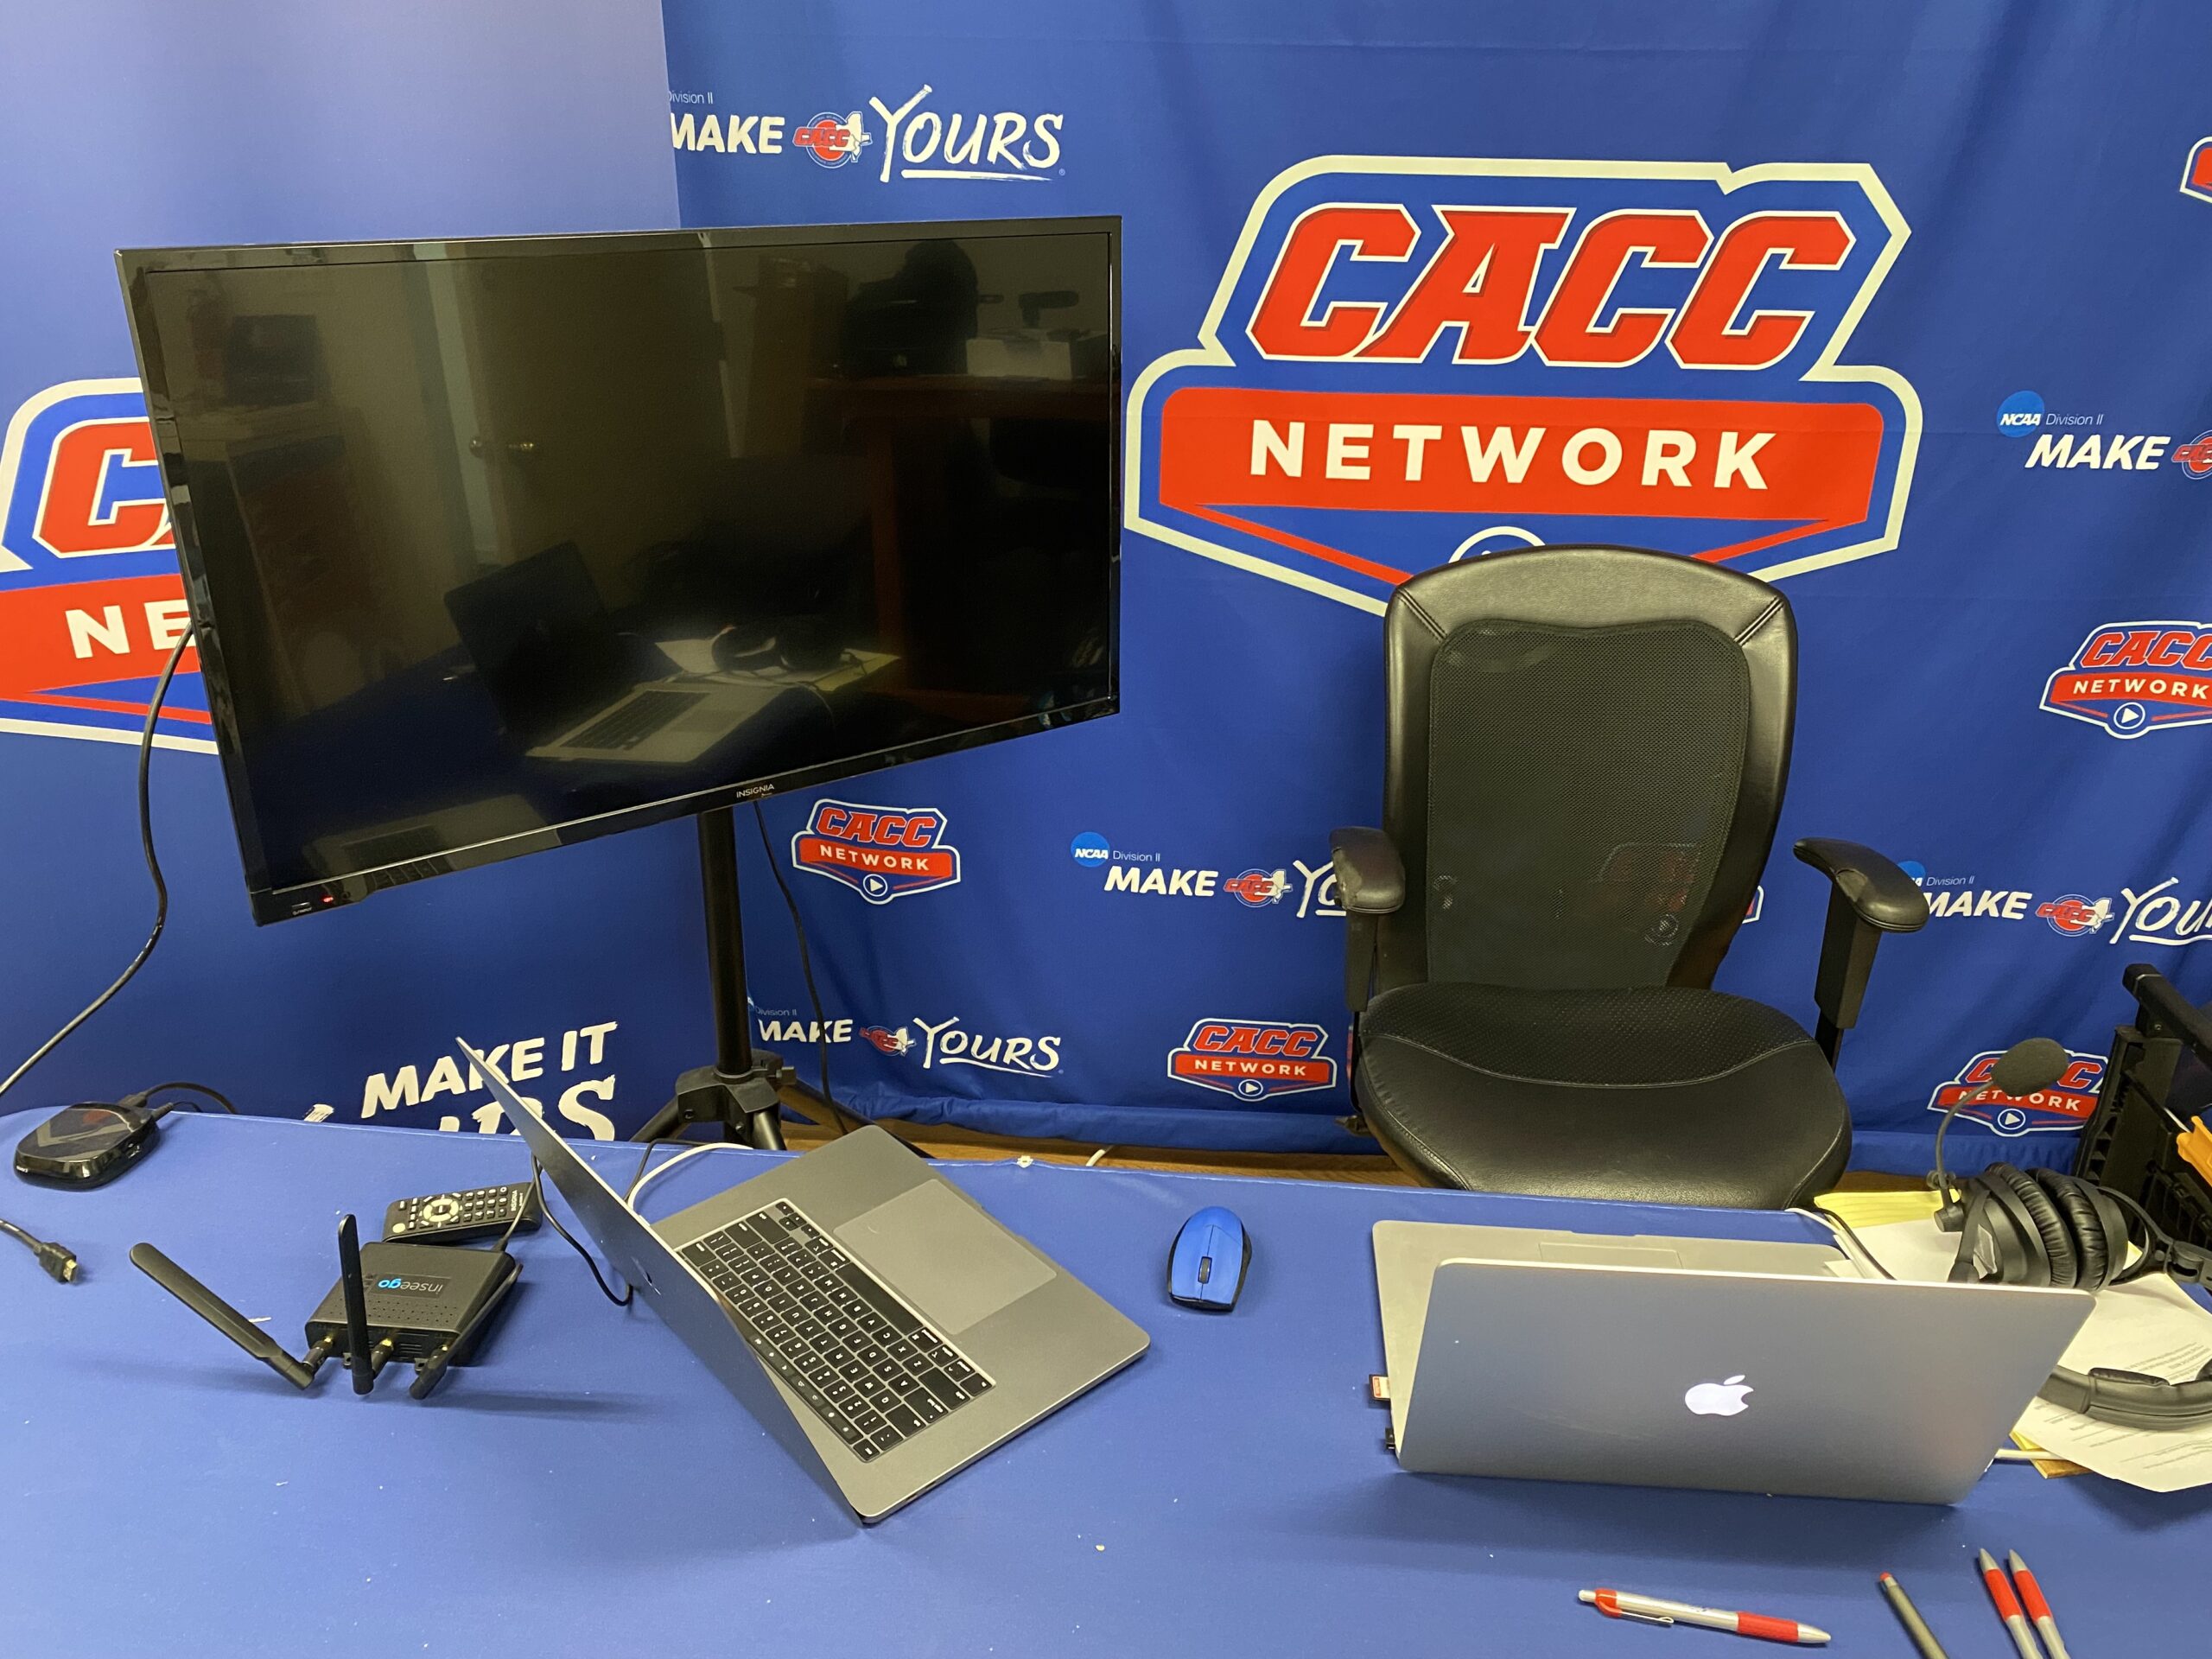 CACC NETWORK TO AIR FULL COURT PRESS BROADCAST DURING